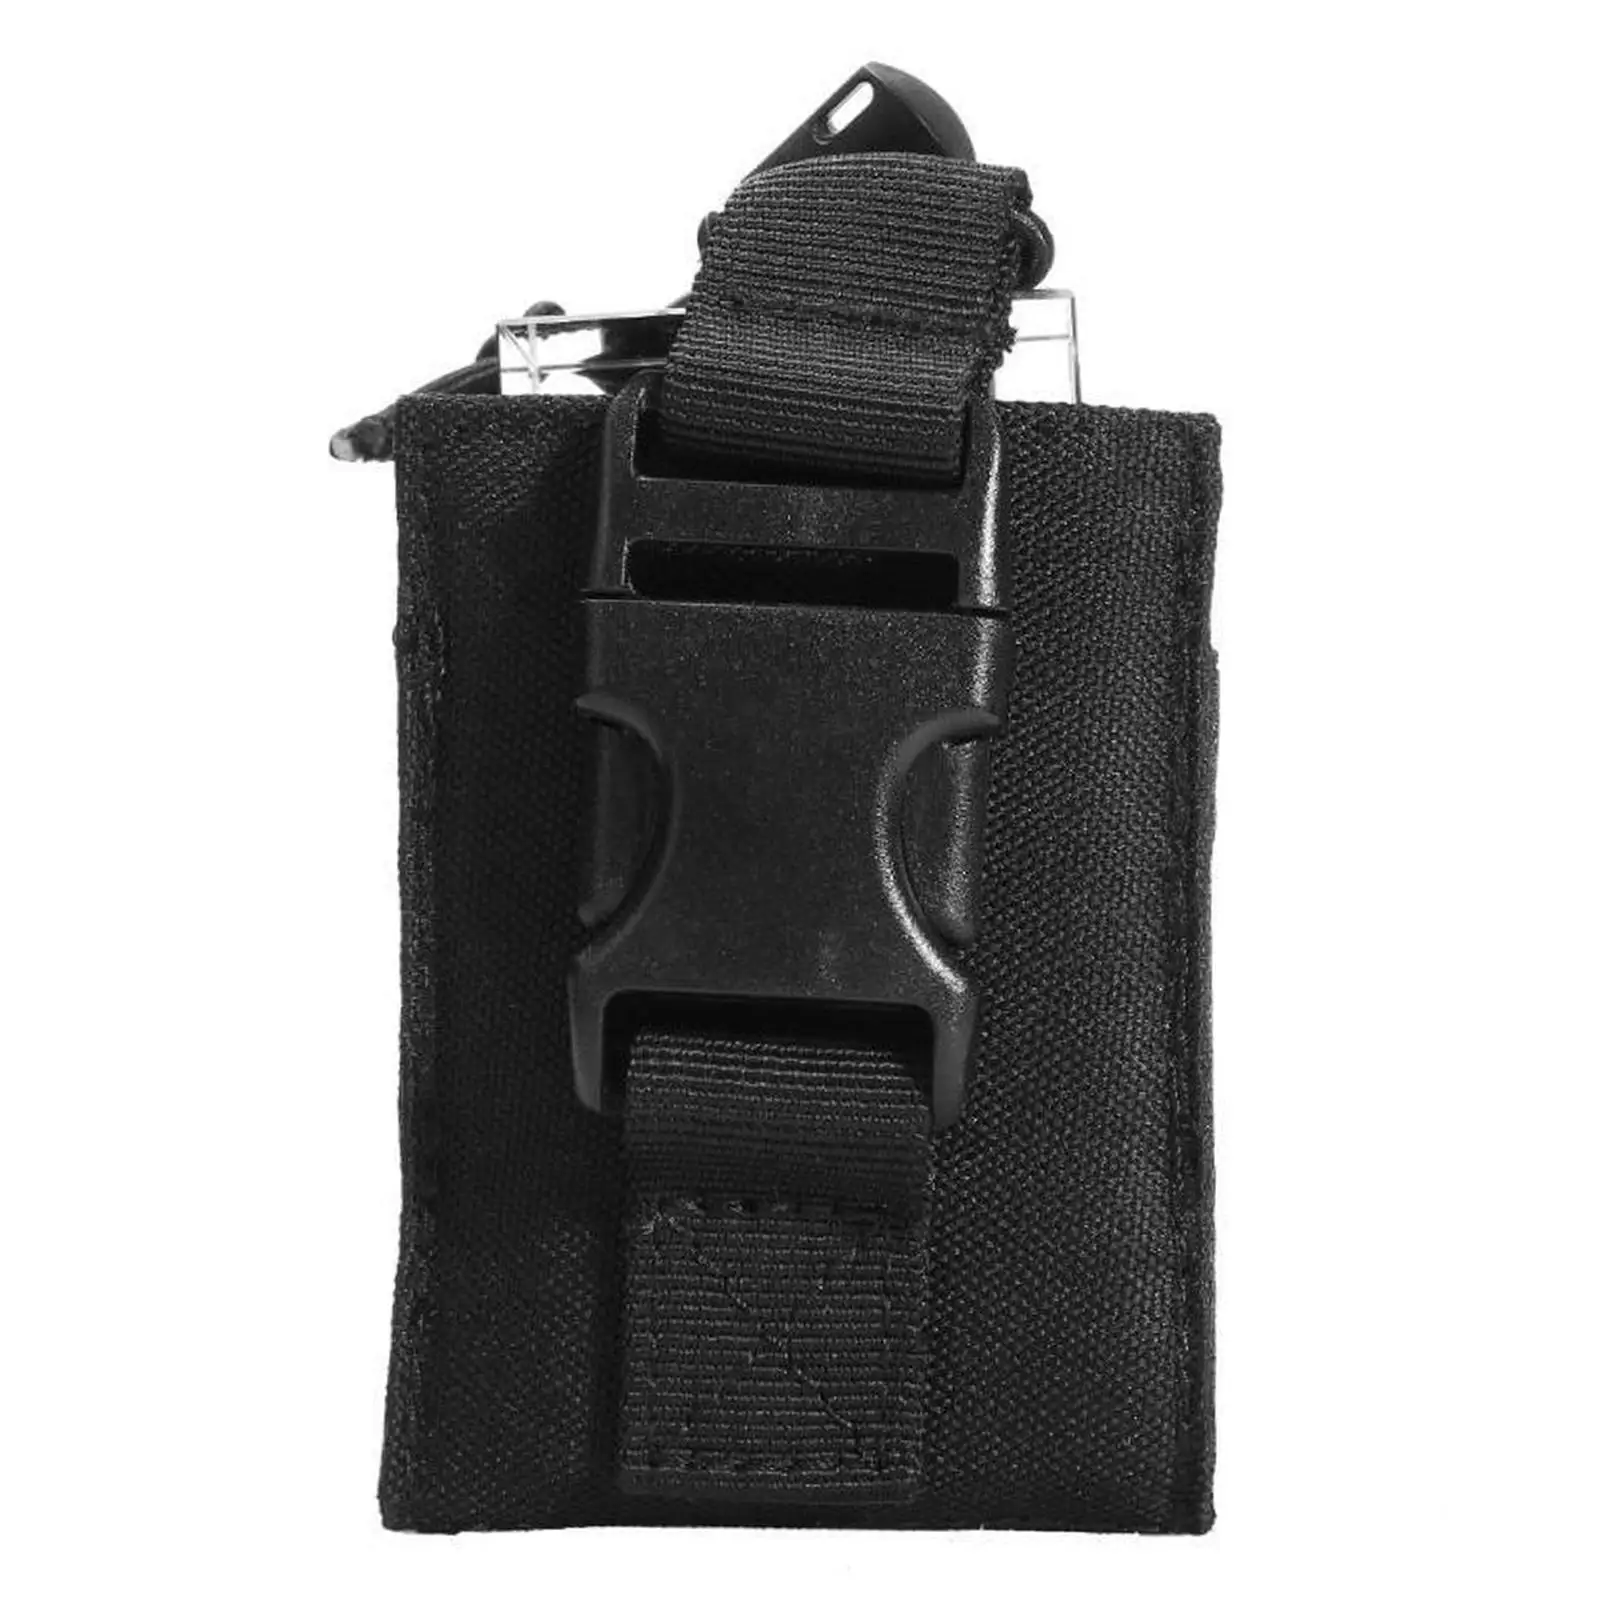 1x Radio Pouch Holder Multifunction Carrying Case Nylon Portable for Camping